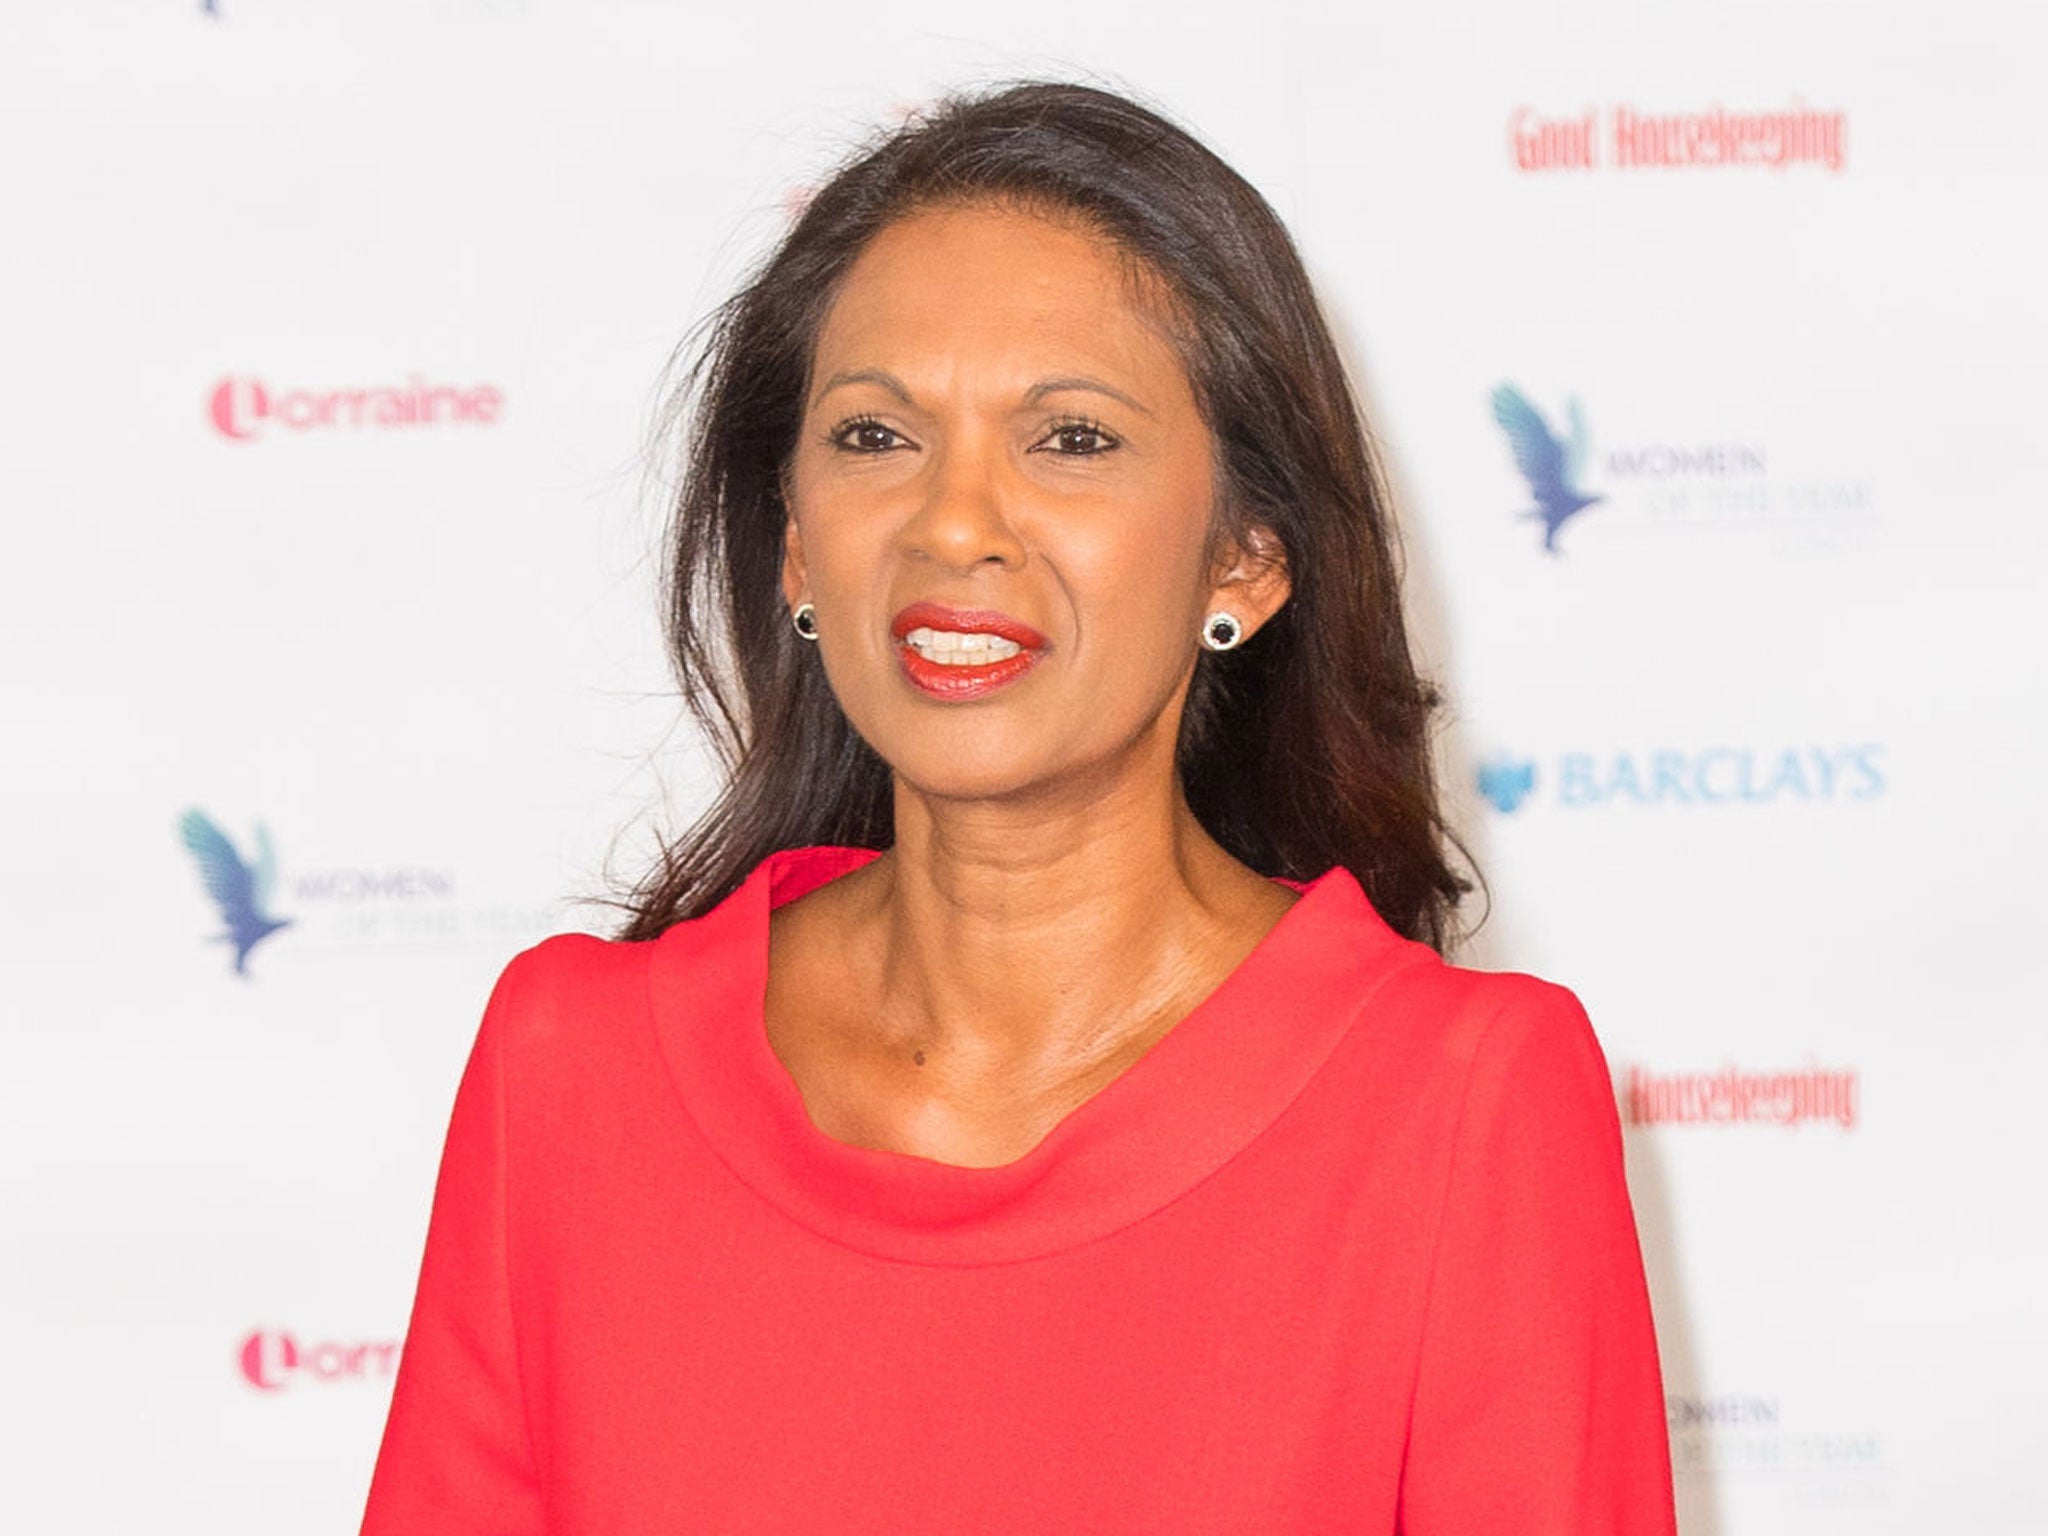 Gina Miller beat Stormzy and boxer Anthony Joshua to the top spot